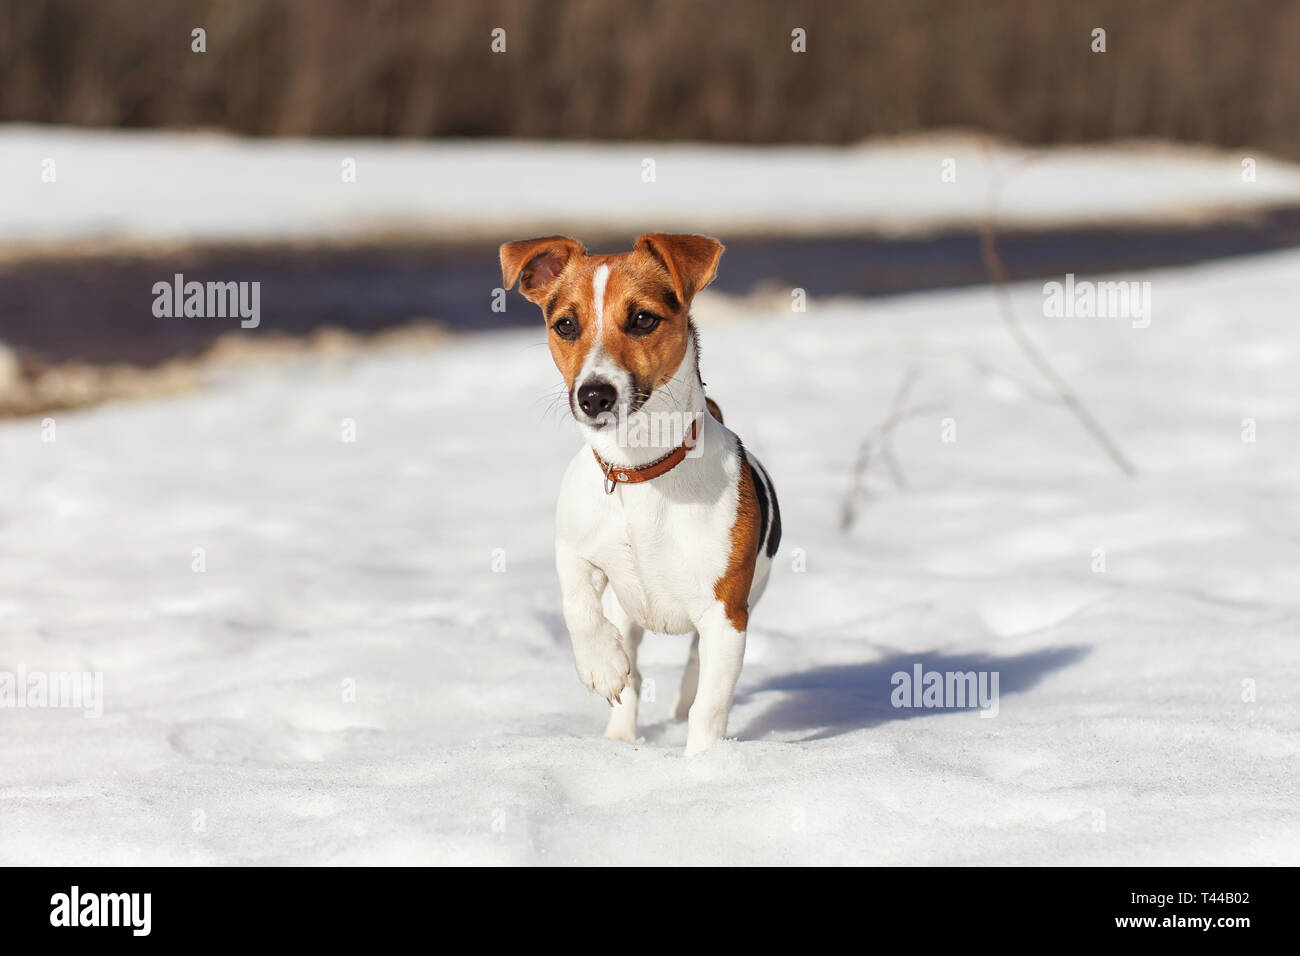 Sun shines on small Jack Russell terrier standing on snow, river behind her Stock Photo